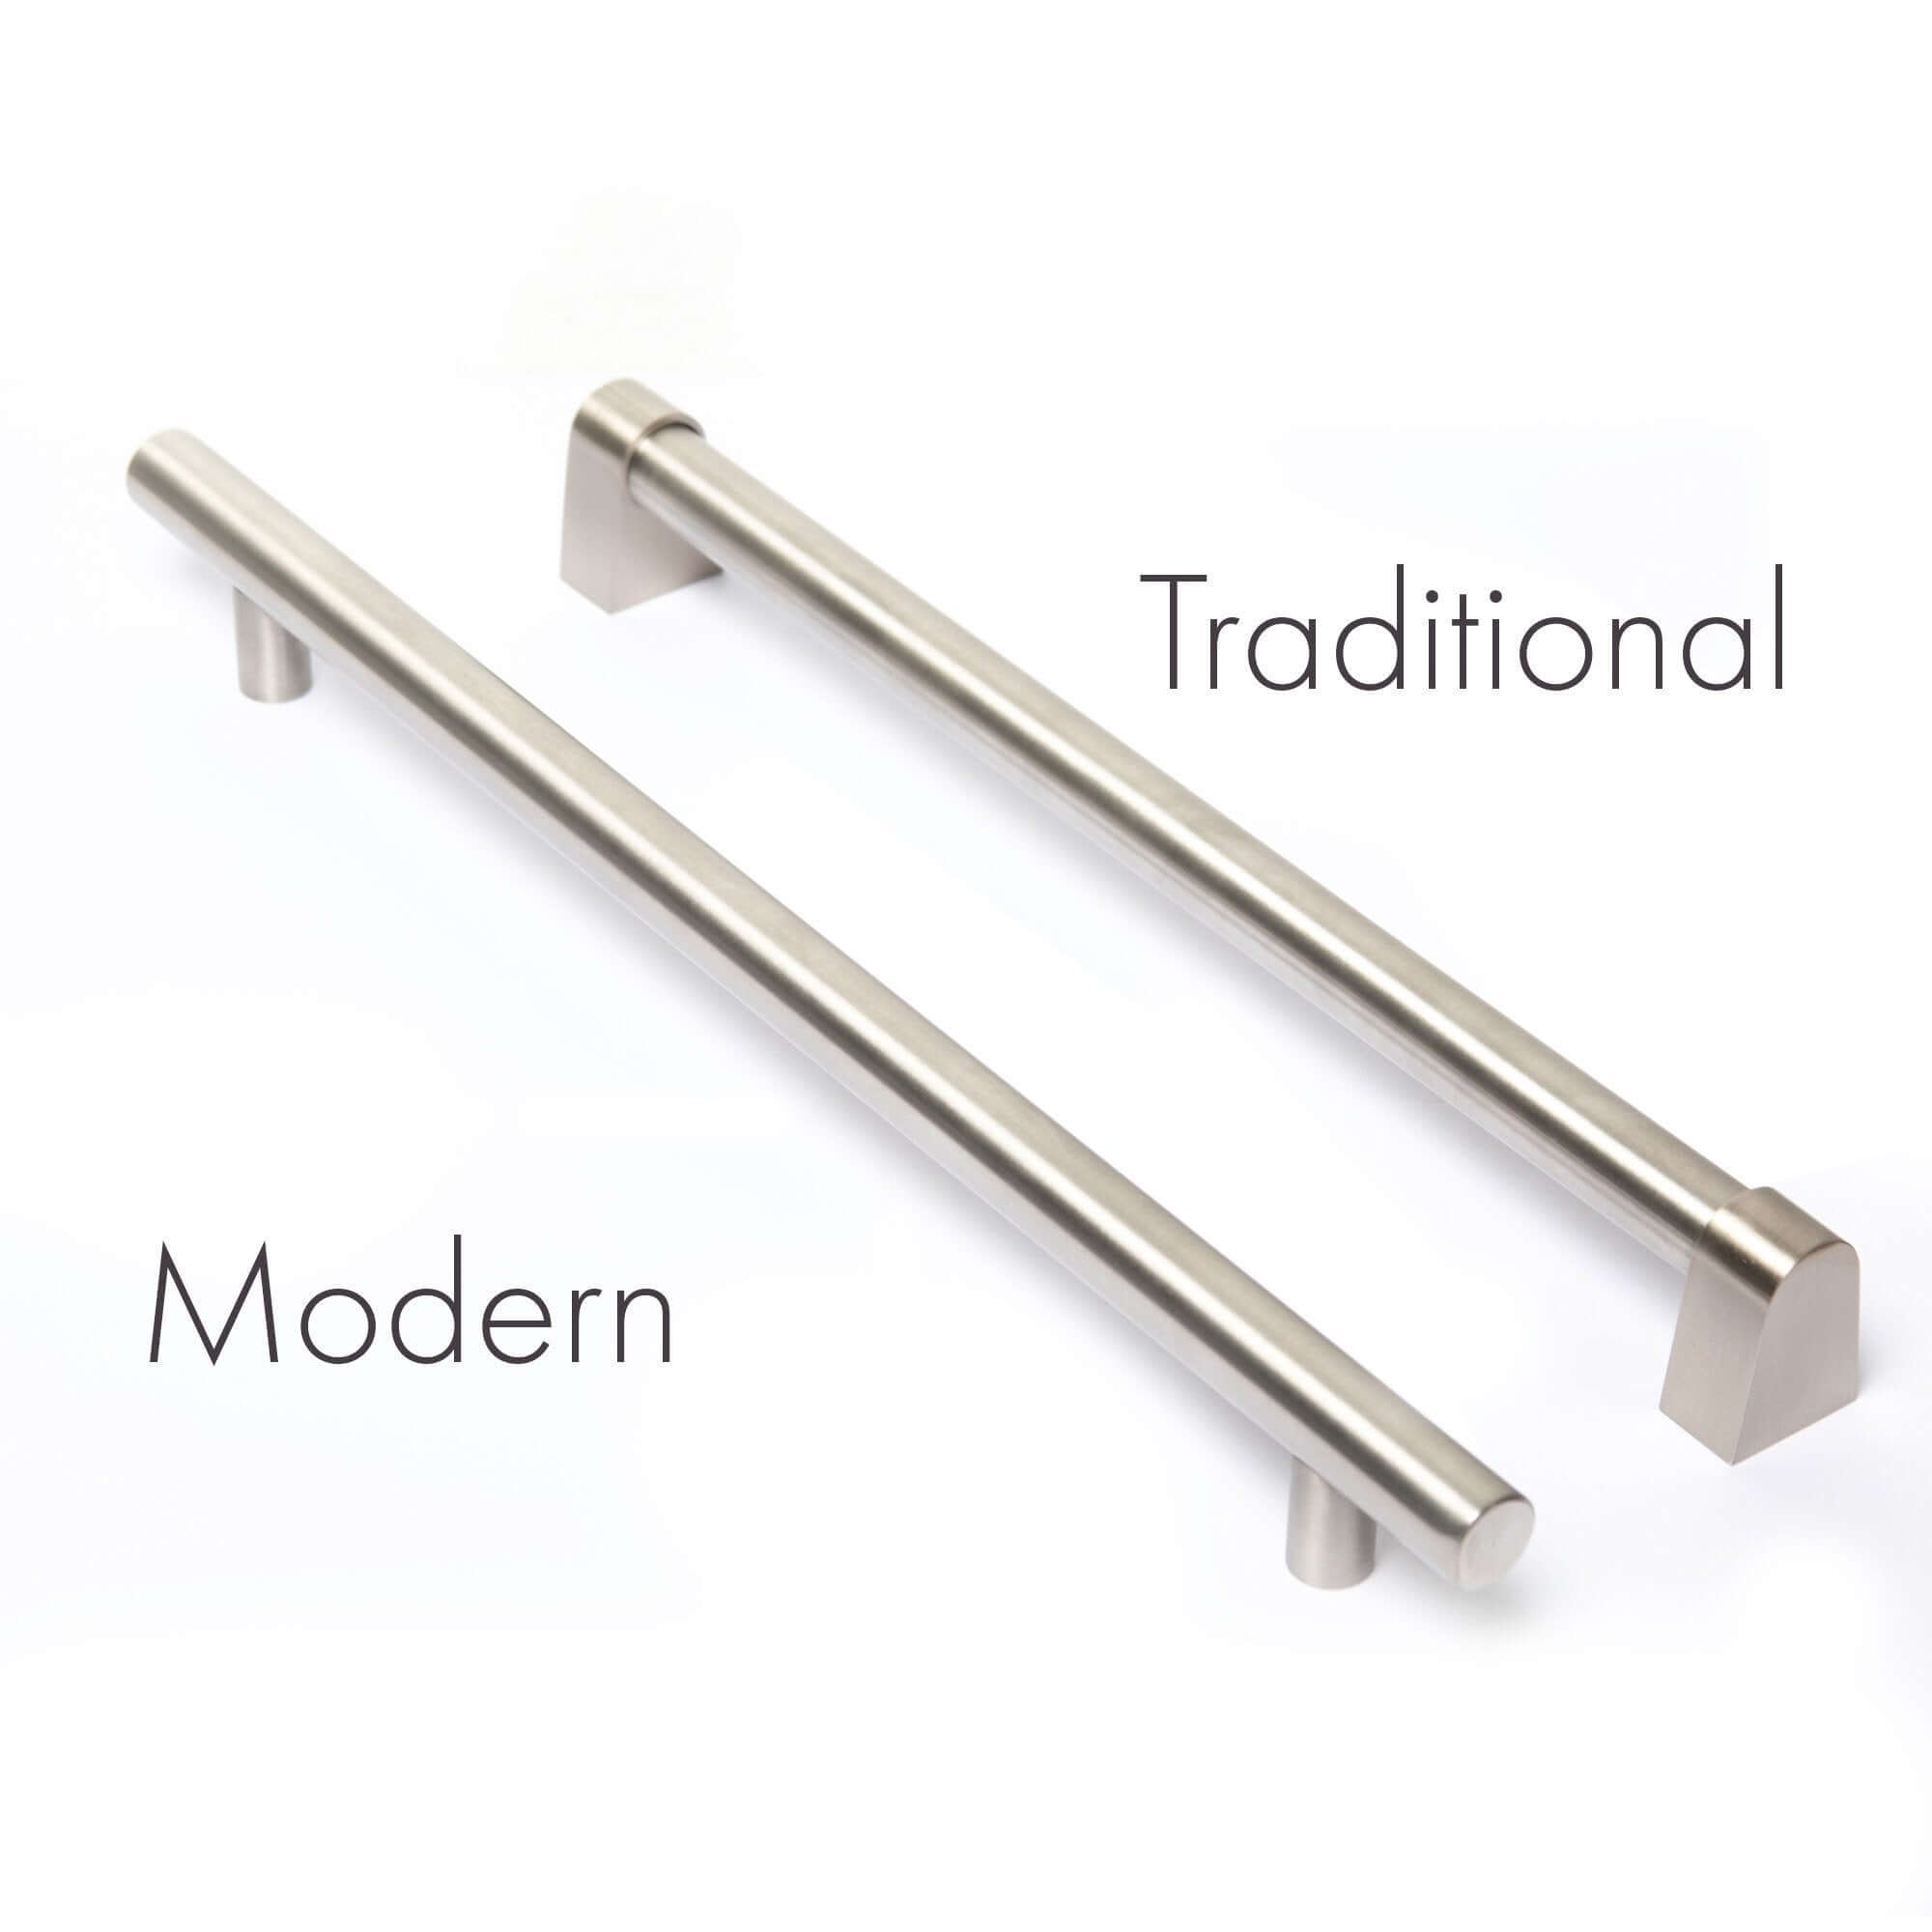 Traditional Handle and Modern Handle Comparison